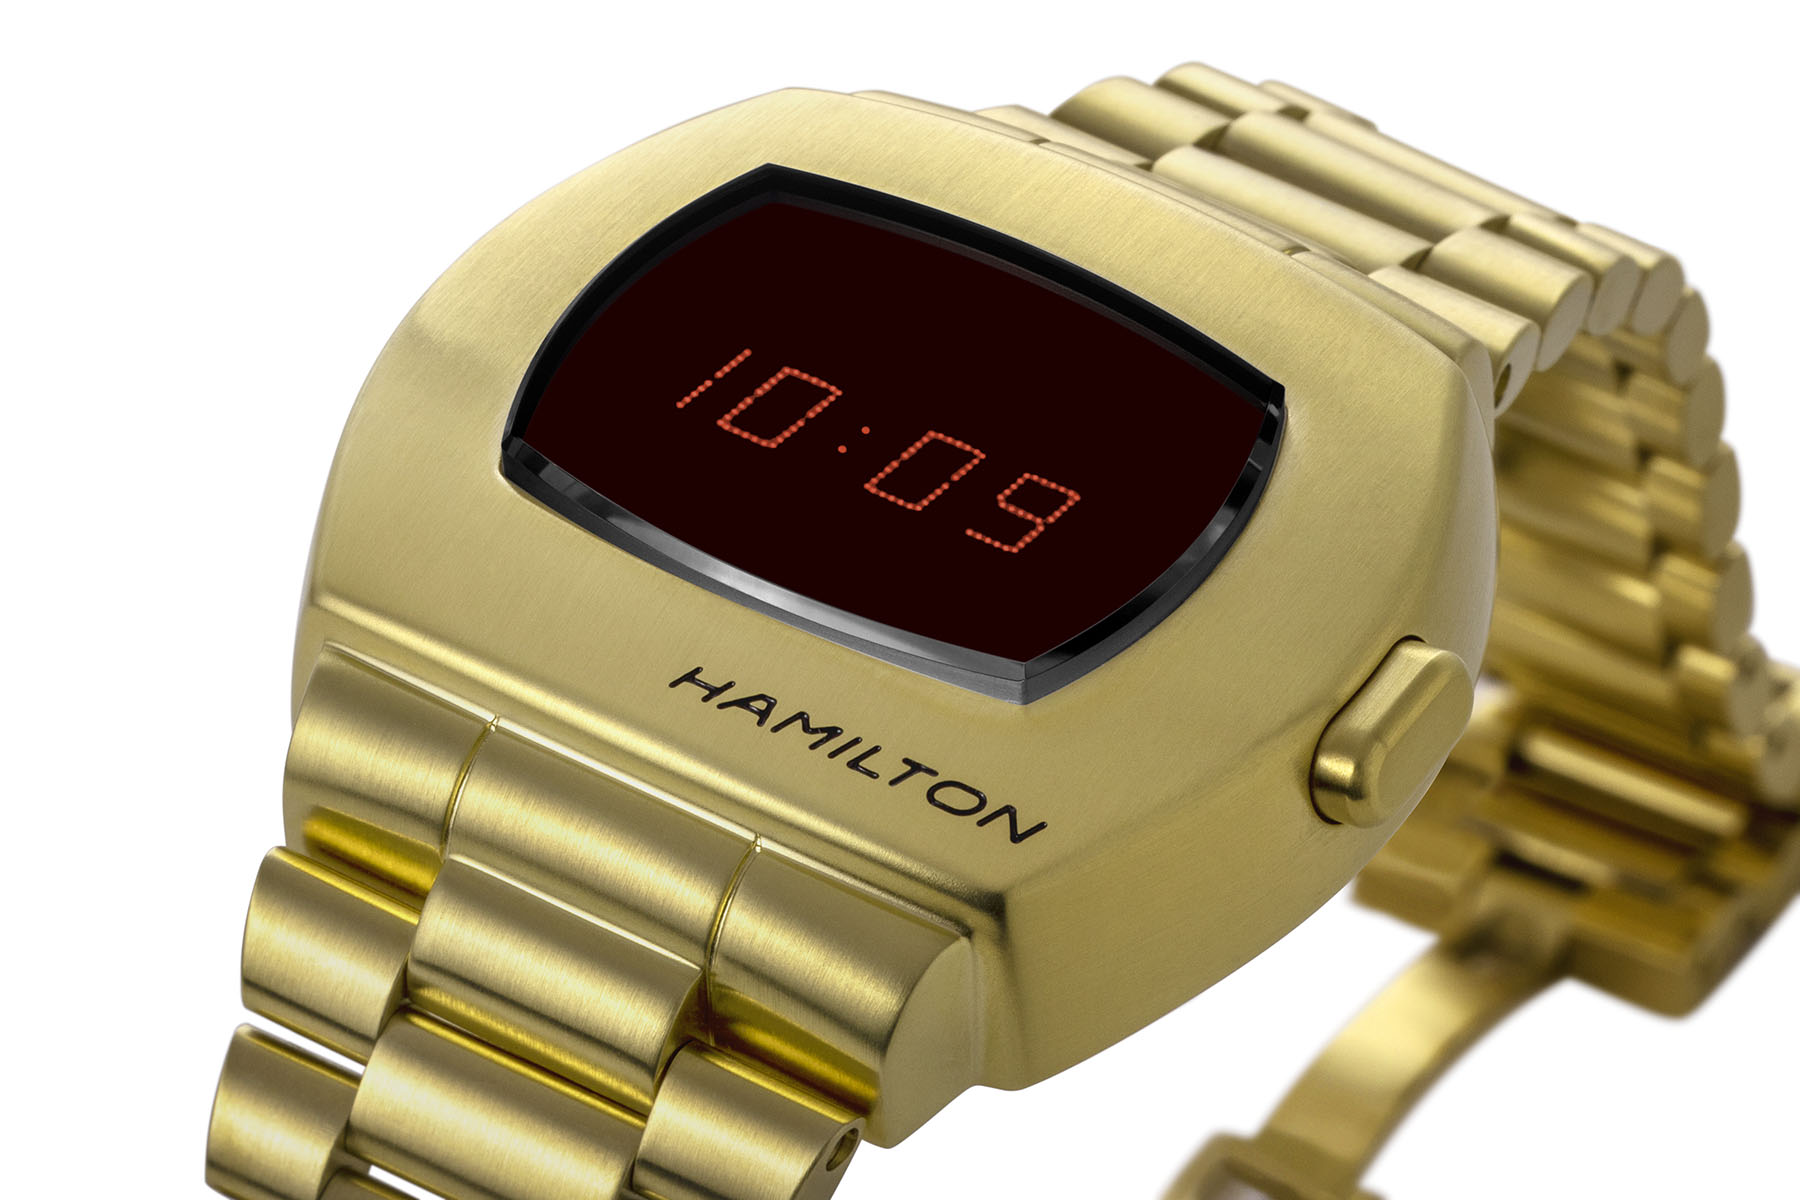 Hamilton PSR in steel with yellow gold PVD coating (Image © Revolution)